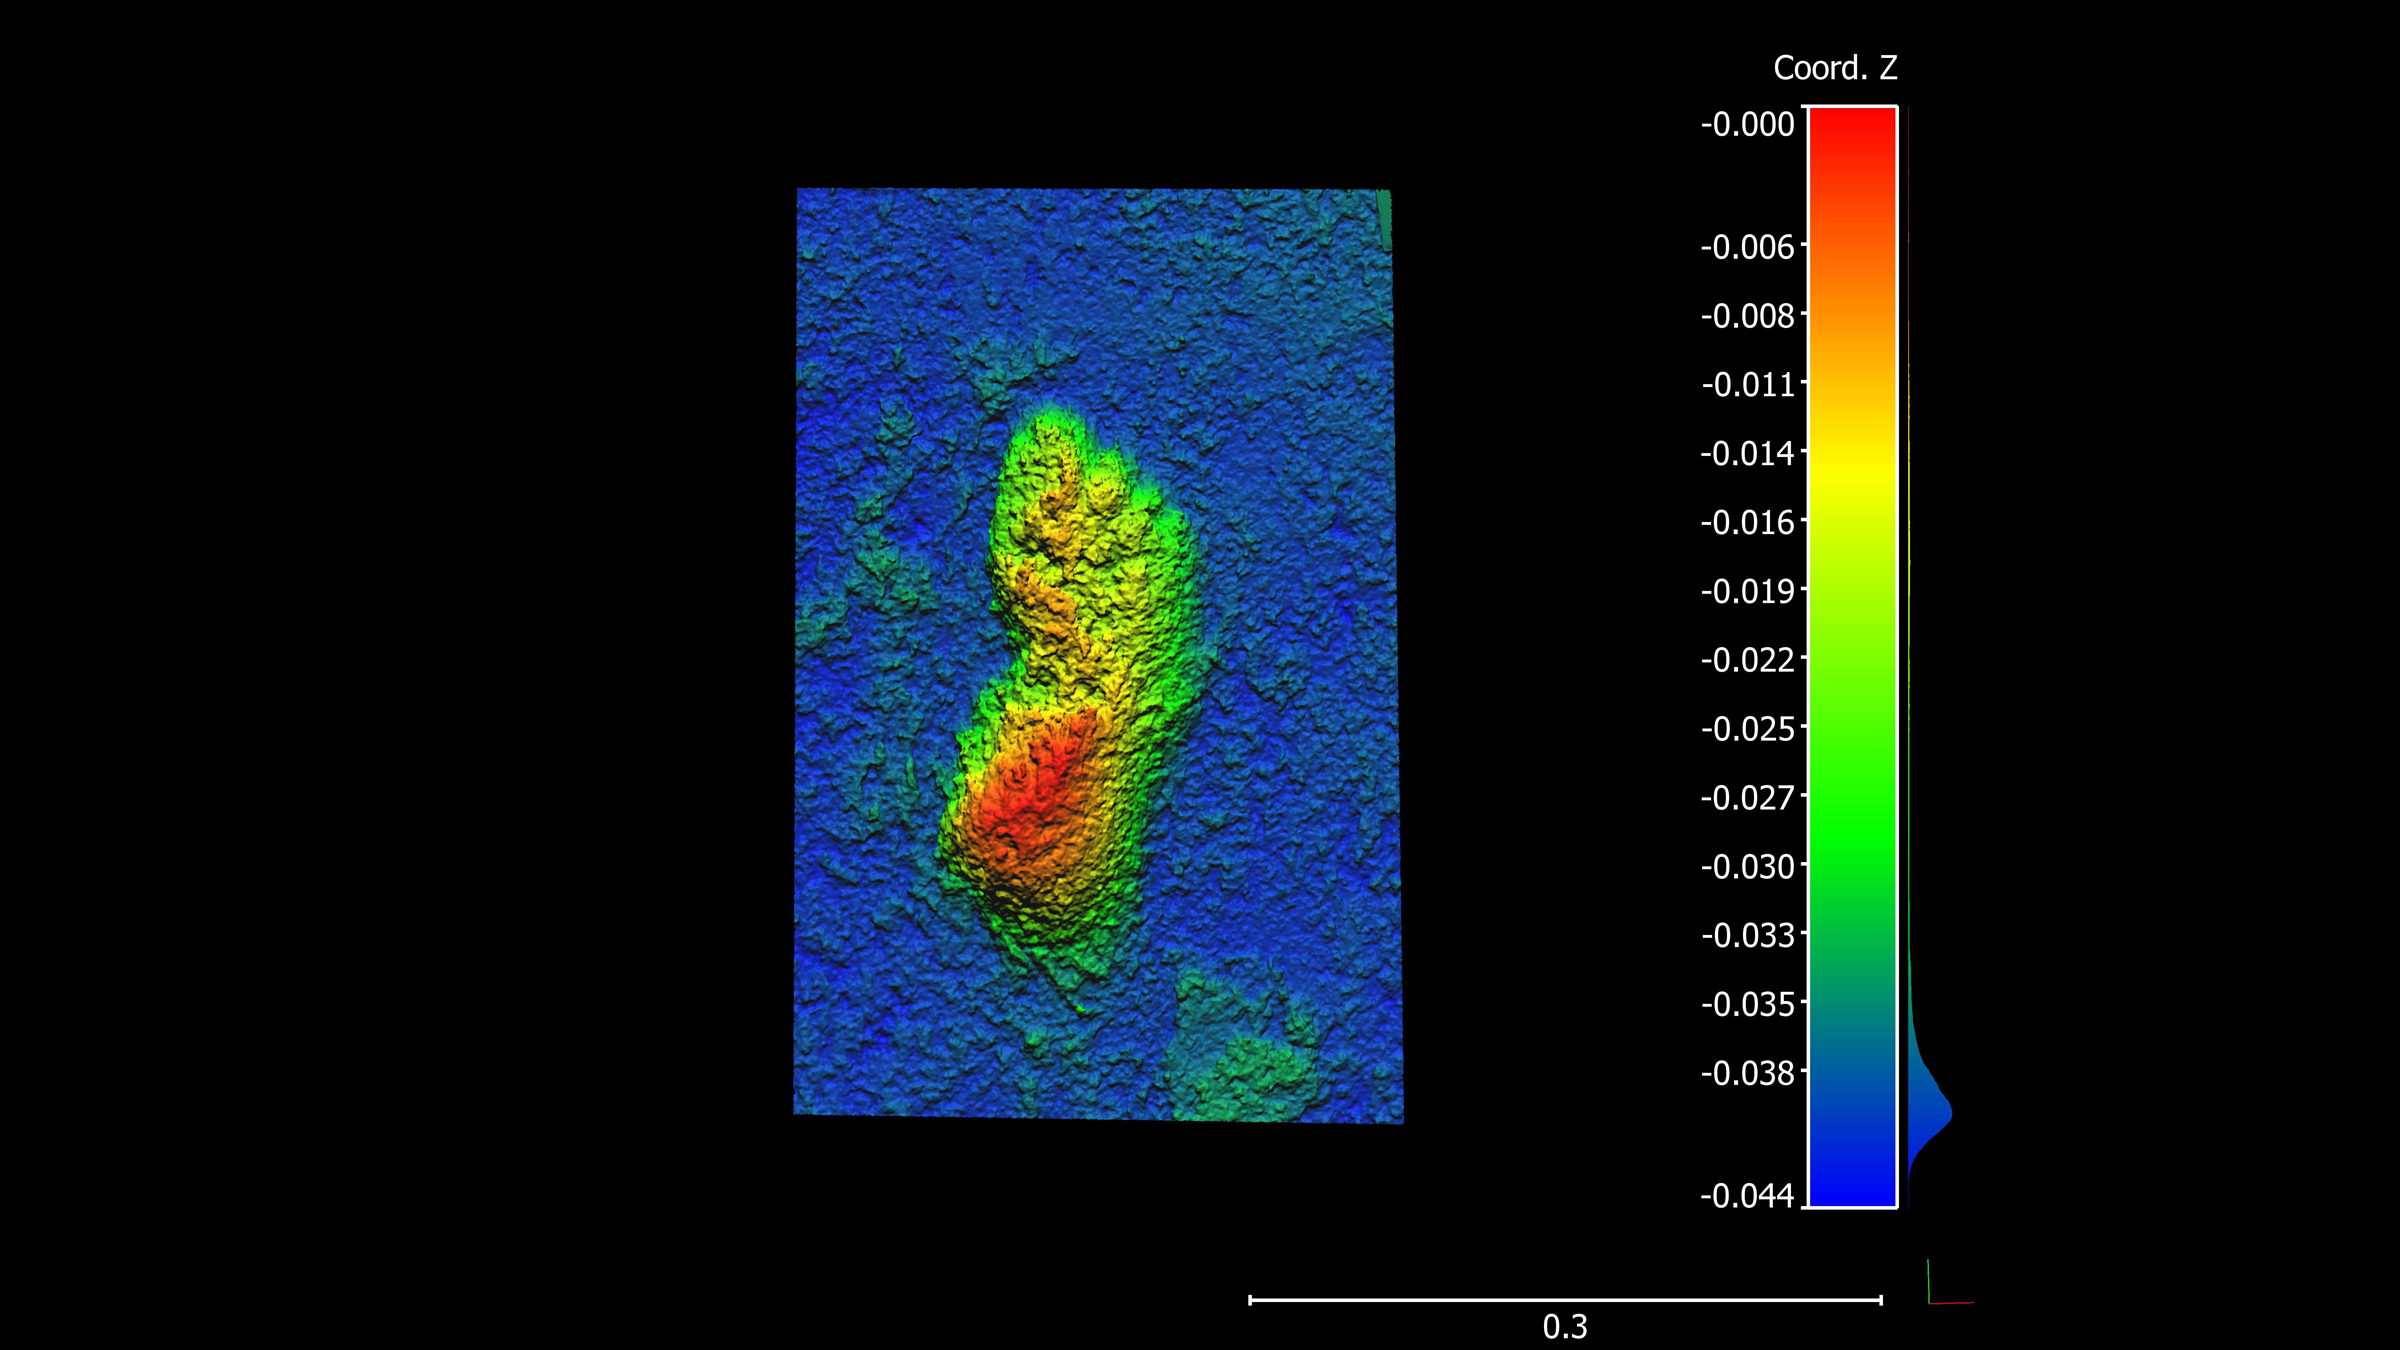 We see a digitally colored image of a human footprint against a black background. The heel is red because it has a deep impression, white the rest is yellow and green because of lighter impressions.